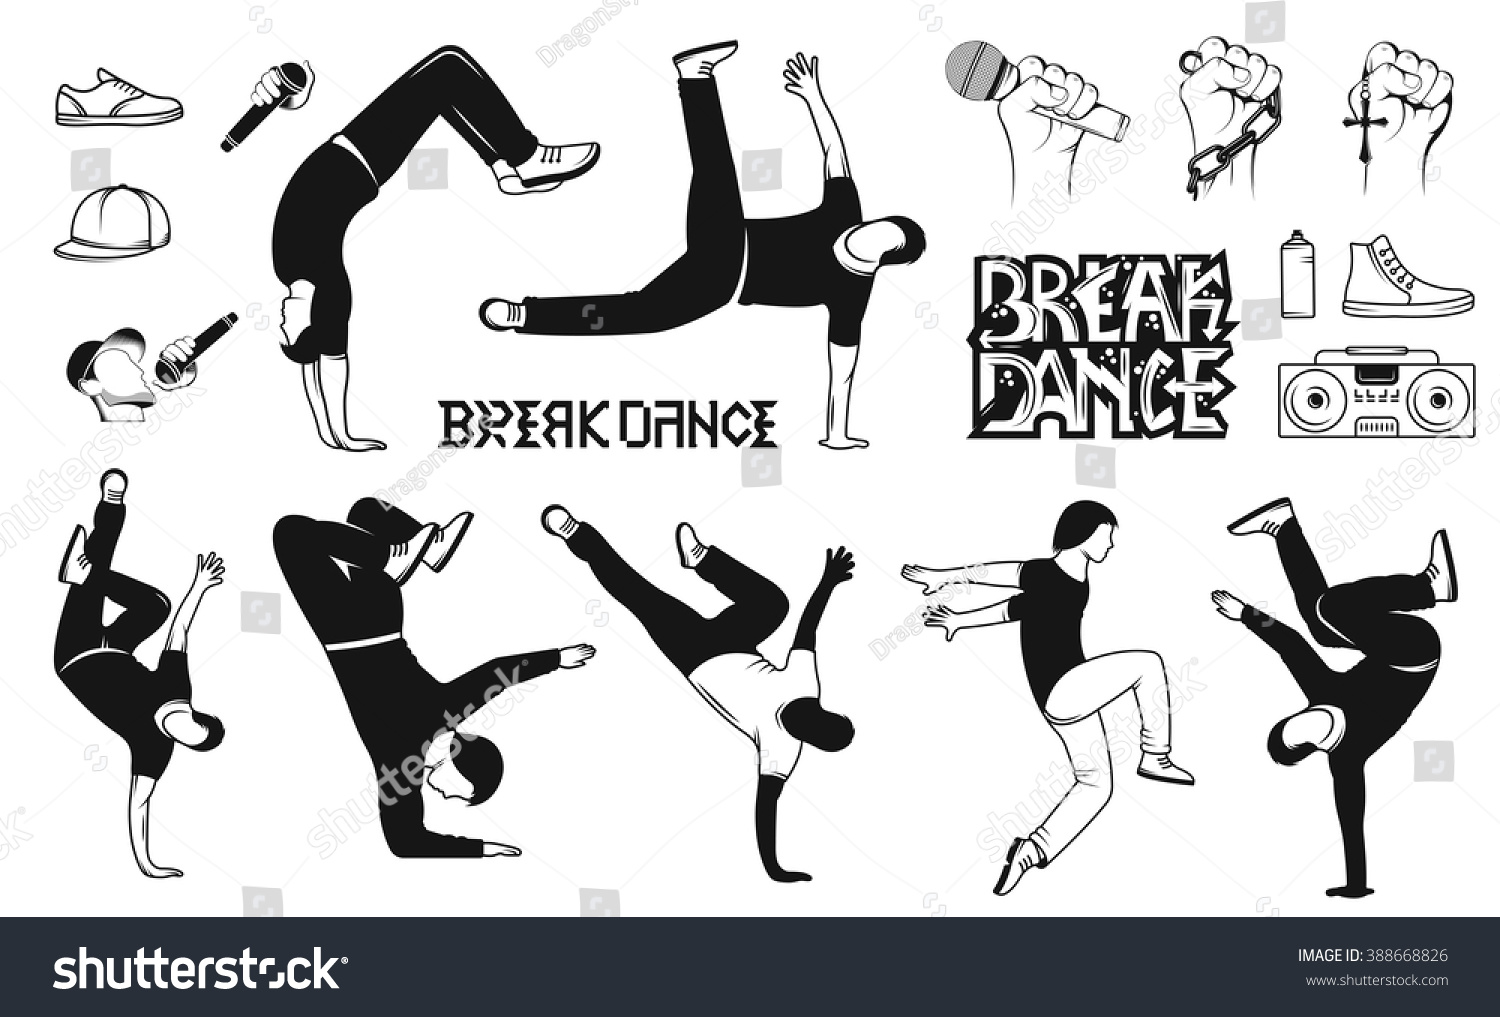 SVG of Break Dance silhouettes man and outfit. Set of Breakdance Bboy Silhouettes in Different Poses. Up, Down, On a Floor, On a Head, Jump, Twist, Rotate.
Silhouette of young man dance Hip-hop with graffiti svg